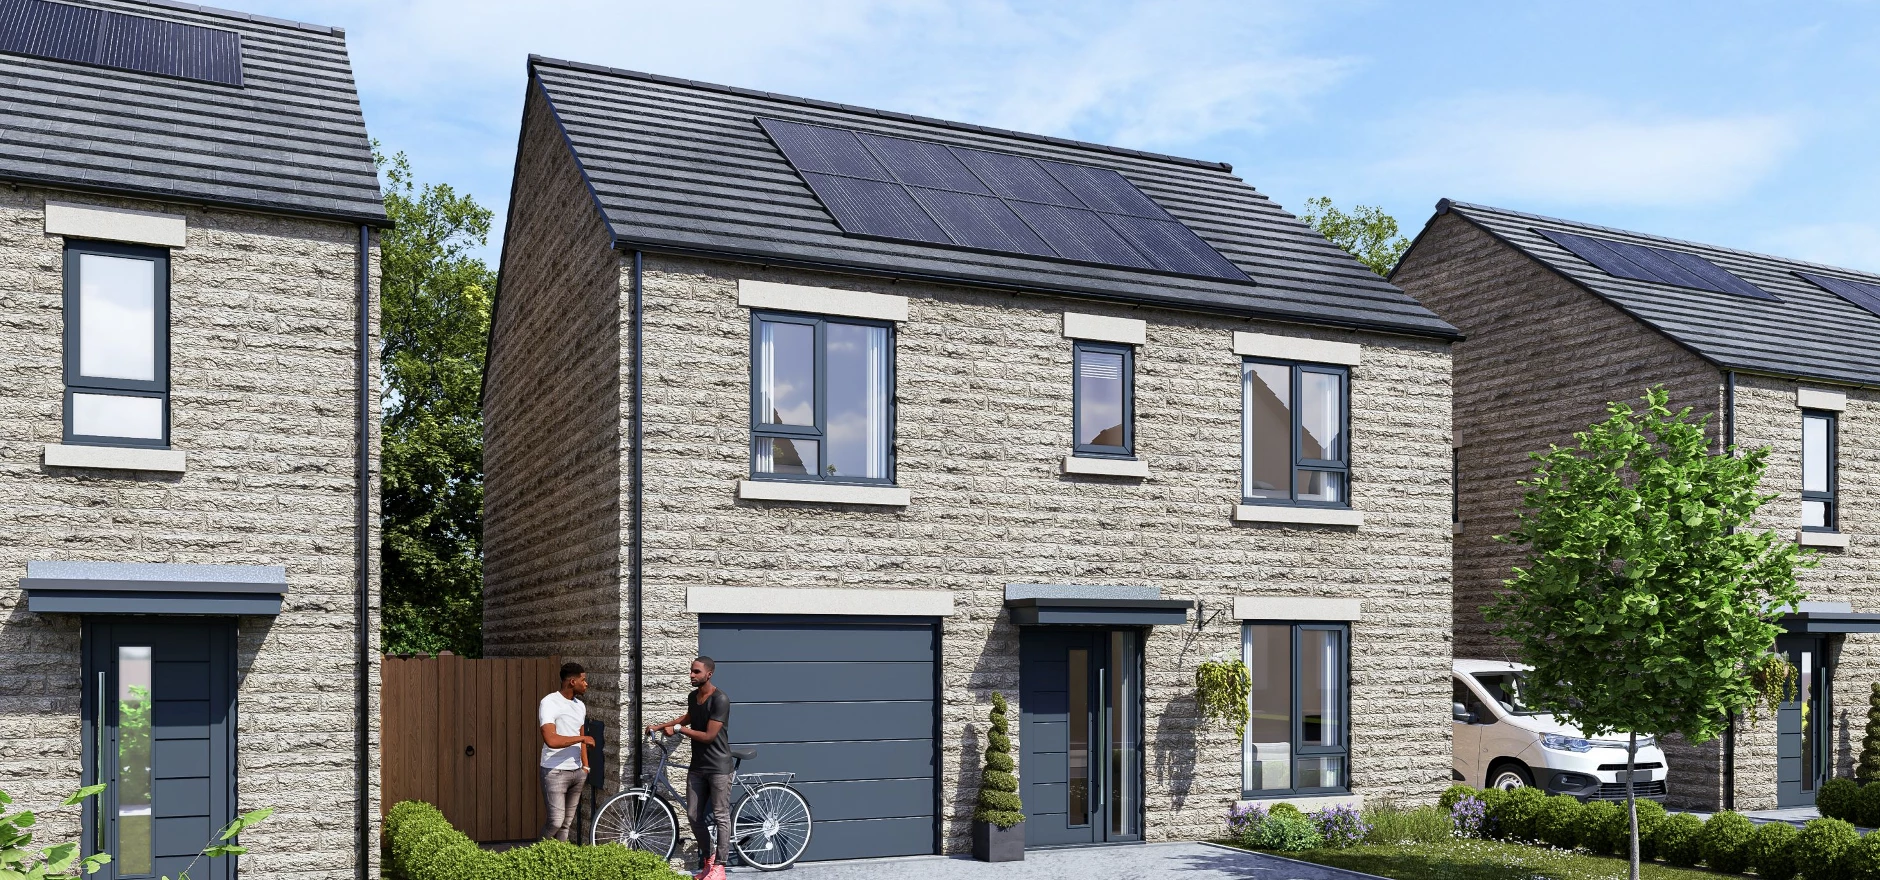 Honey intends to build 67 new homes at Fenay Bridge, Huddersfield (CGI is illustrative of proposed house types).jpeg